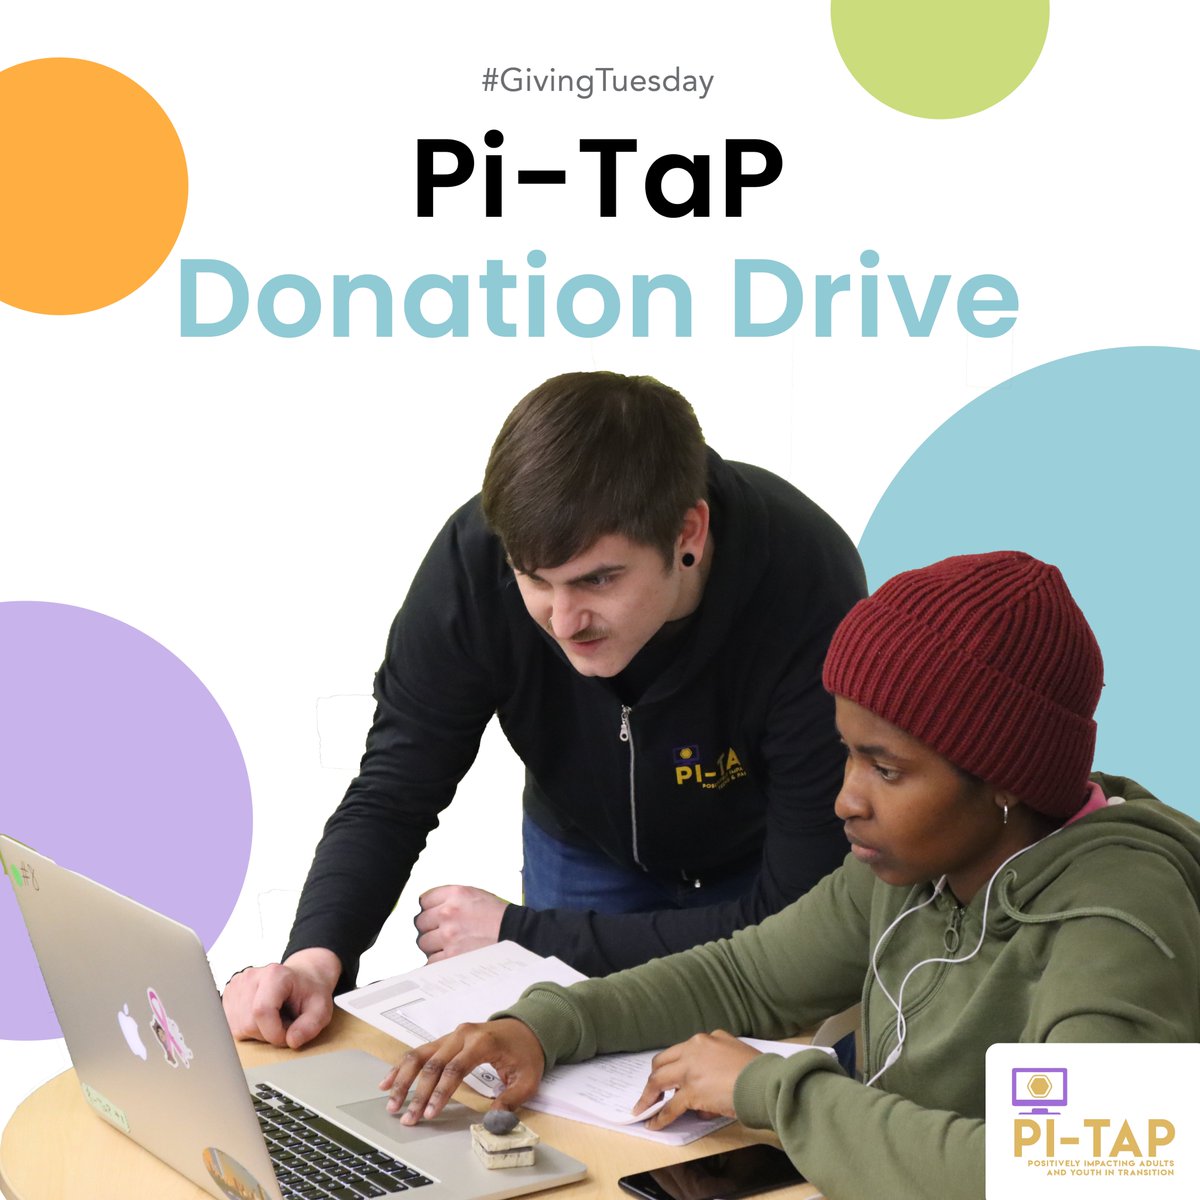 Help make the dream of a career in tech a reality for underrepresented groups!

Donate today at: pi-tap.org/donate
.
.
#GivingTuesday #nonprofit #donate #fundraiser #supportDEI #DEI